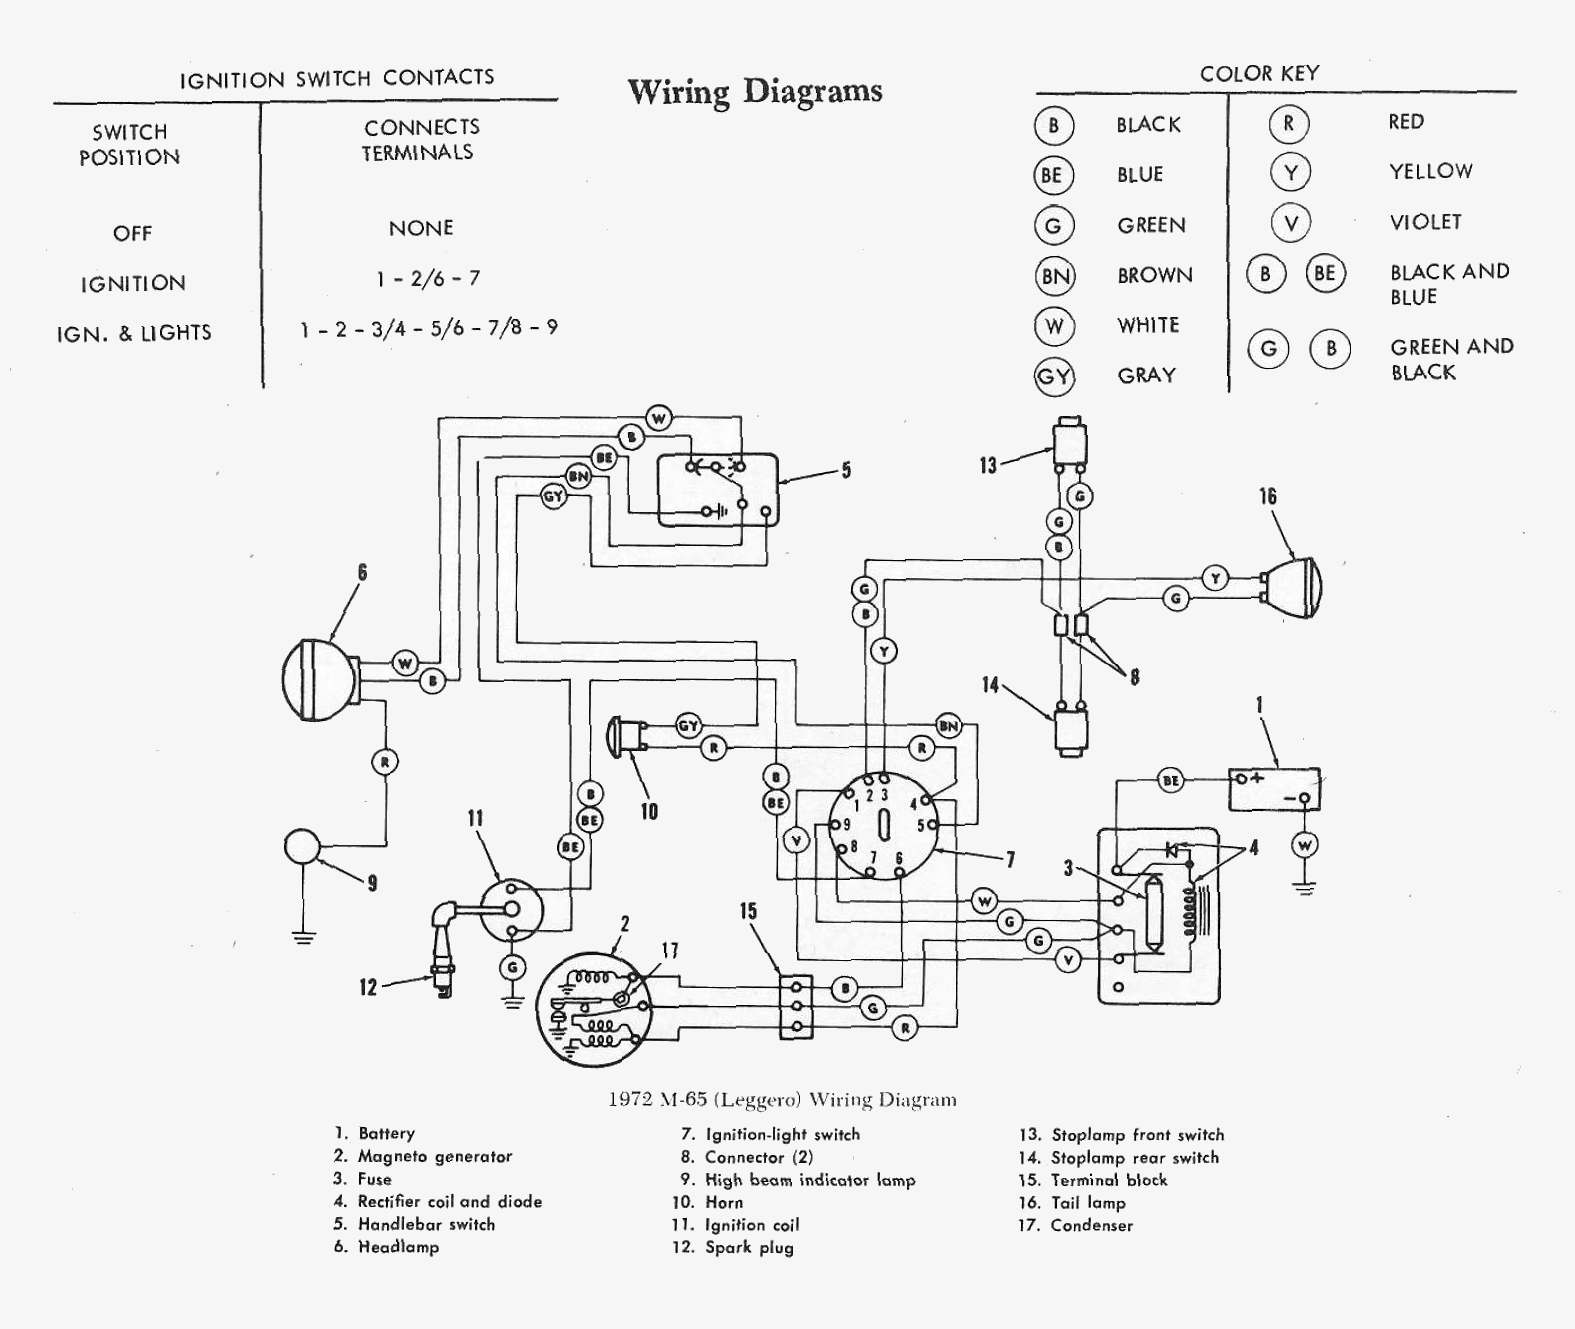 Dan's Motorcycle "Various Wiring Systems and Diagrams"